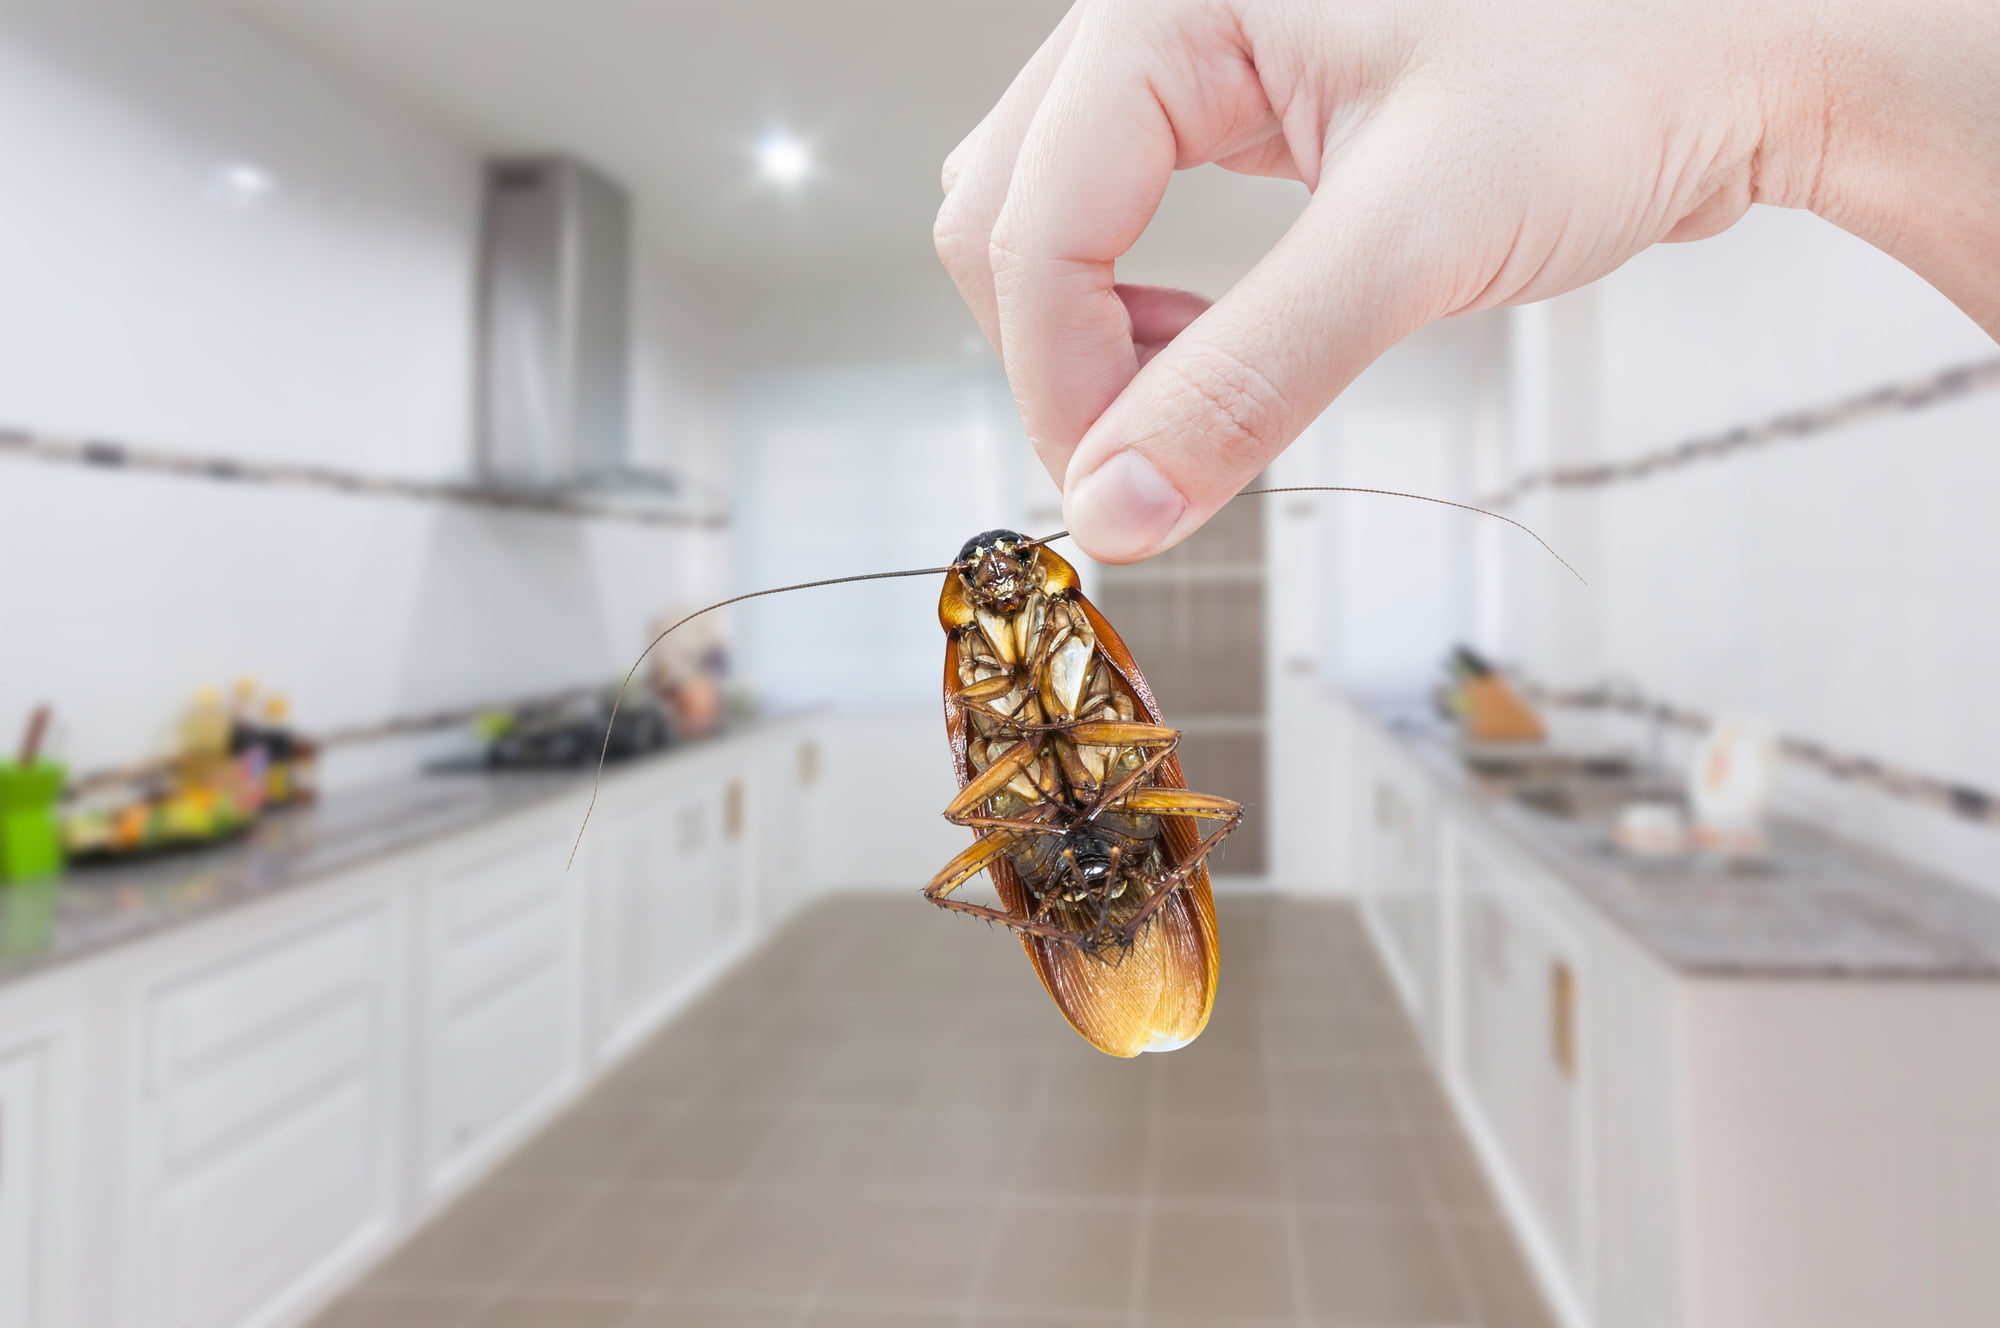 Household pests aren't just irritating. They're walking health and safety hazards! Here are three important pests to avoid.